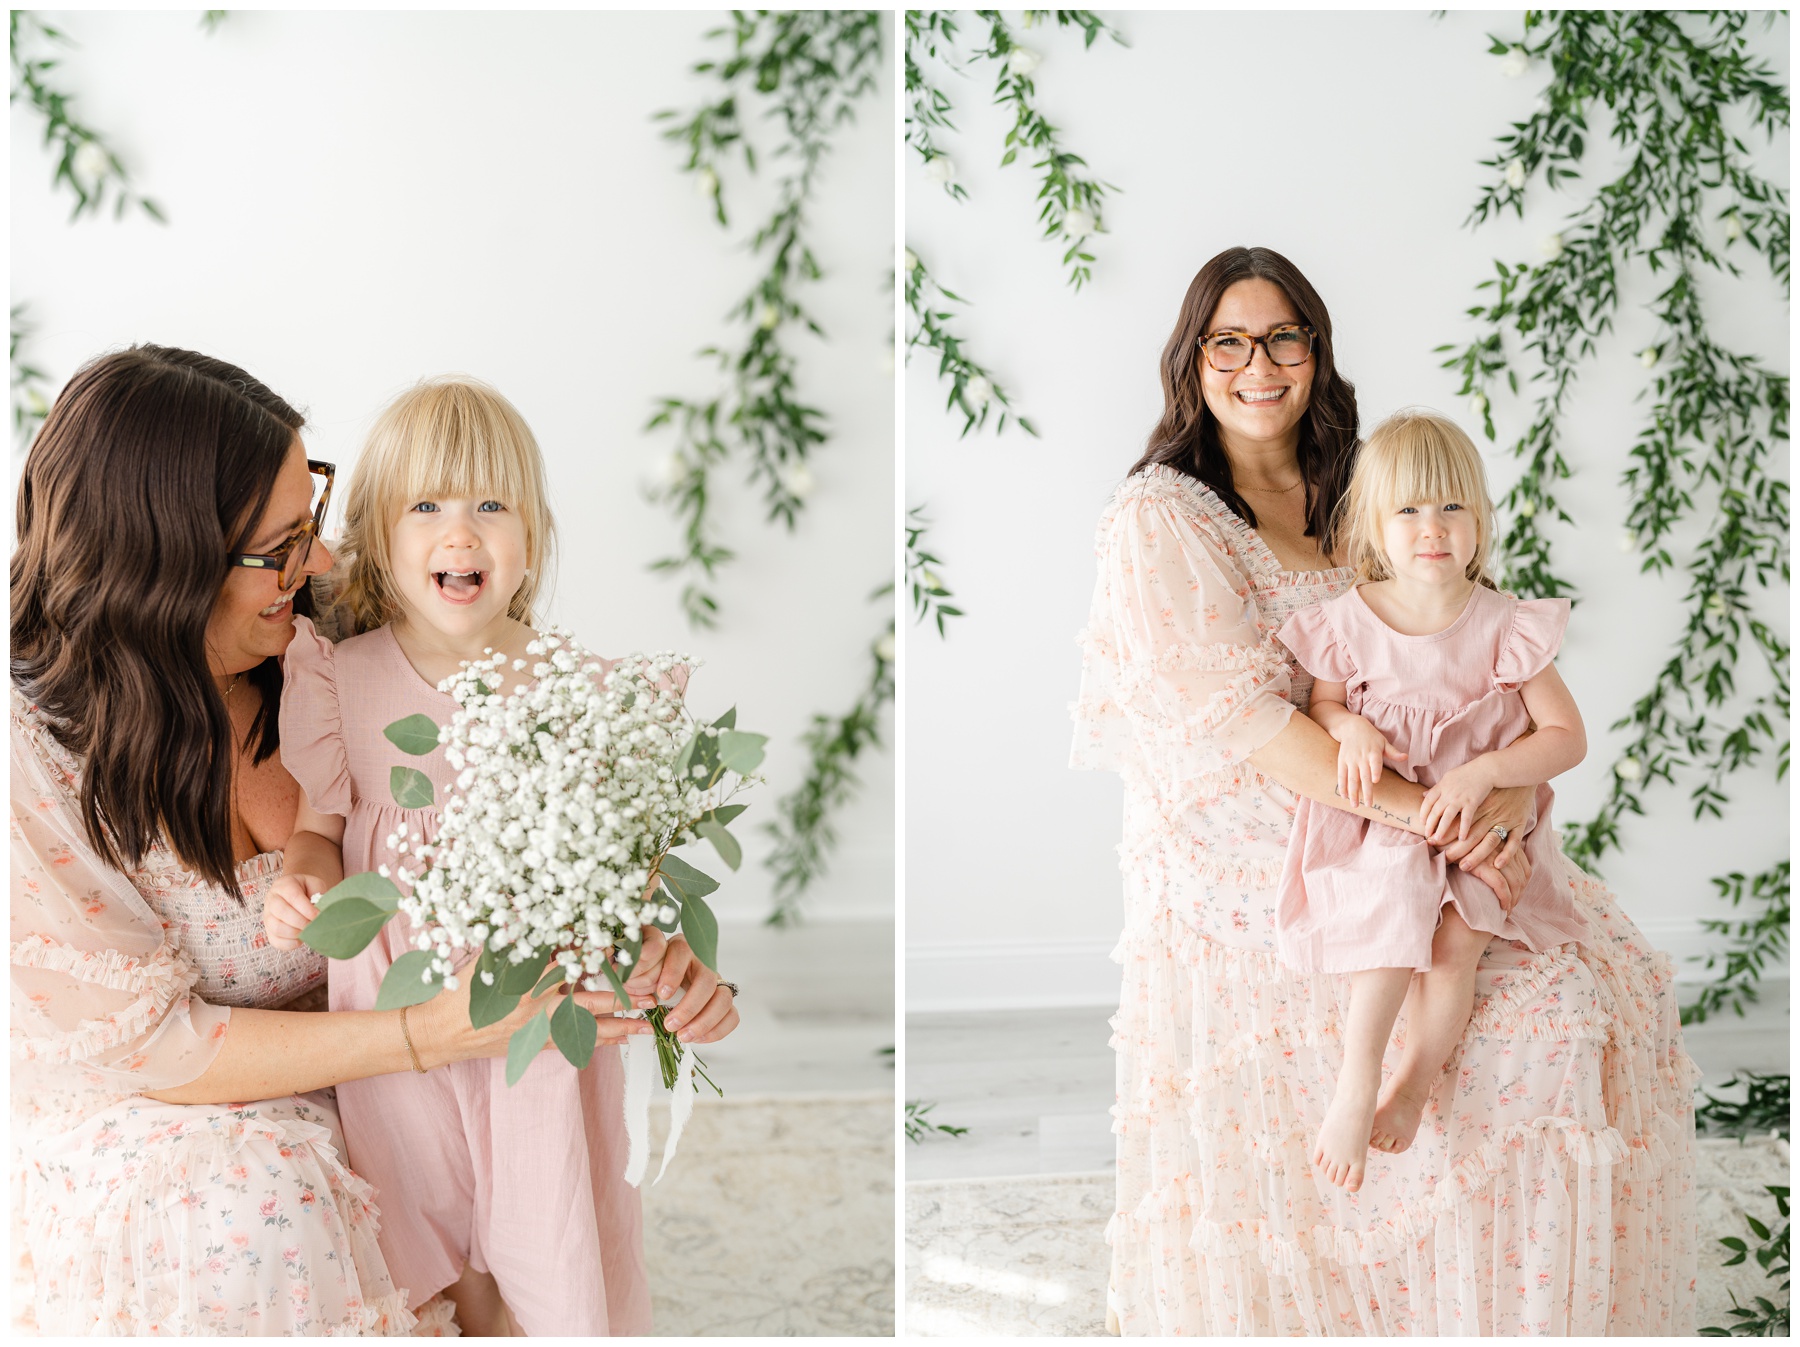 Two photos of a mother in a dress holding her young daughter for a portrait.